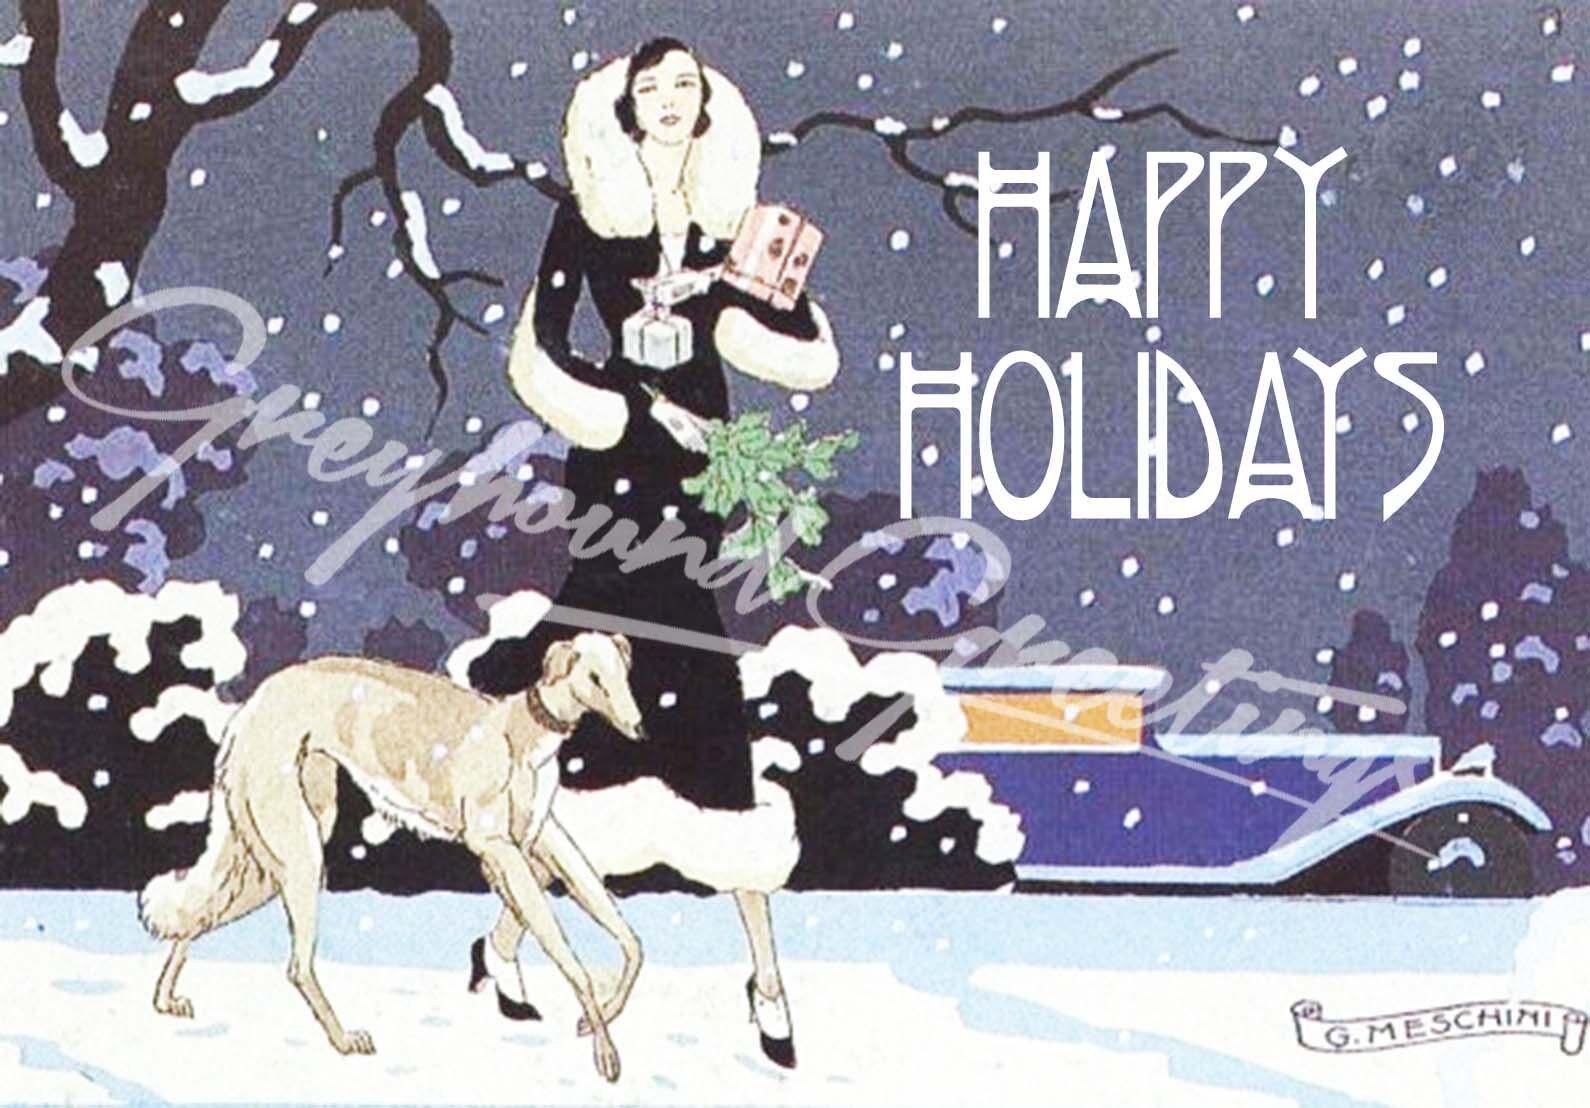 Vintage Altered Art Greyhound and Lady Happy Holidays Cards - Set of 4, with env